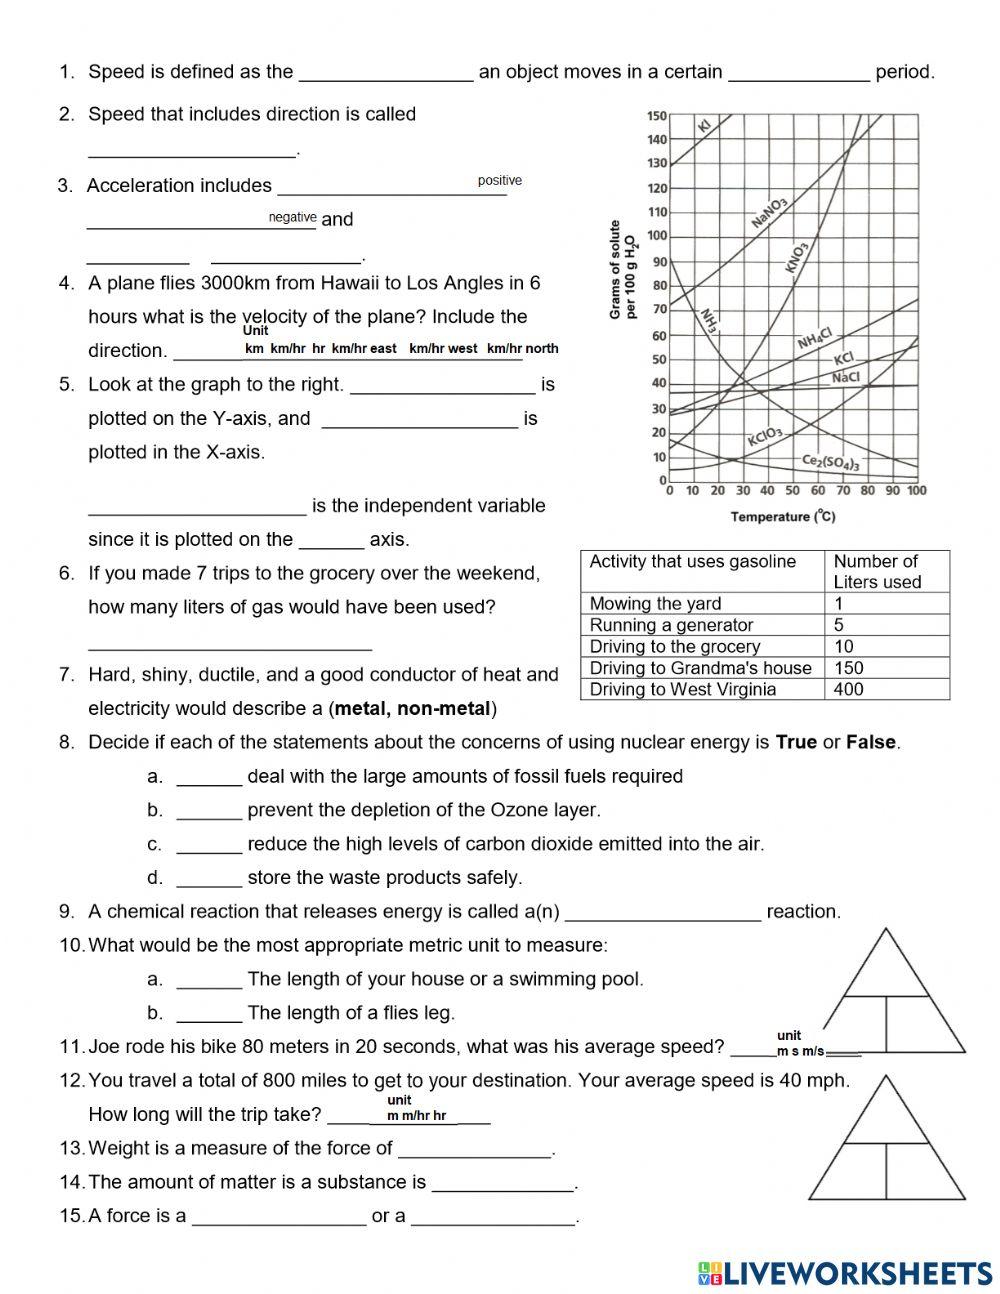 BM-3-Study Guide page 1-2021